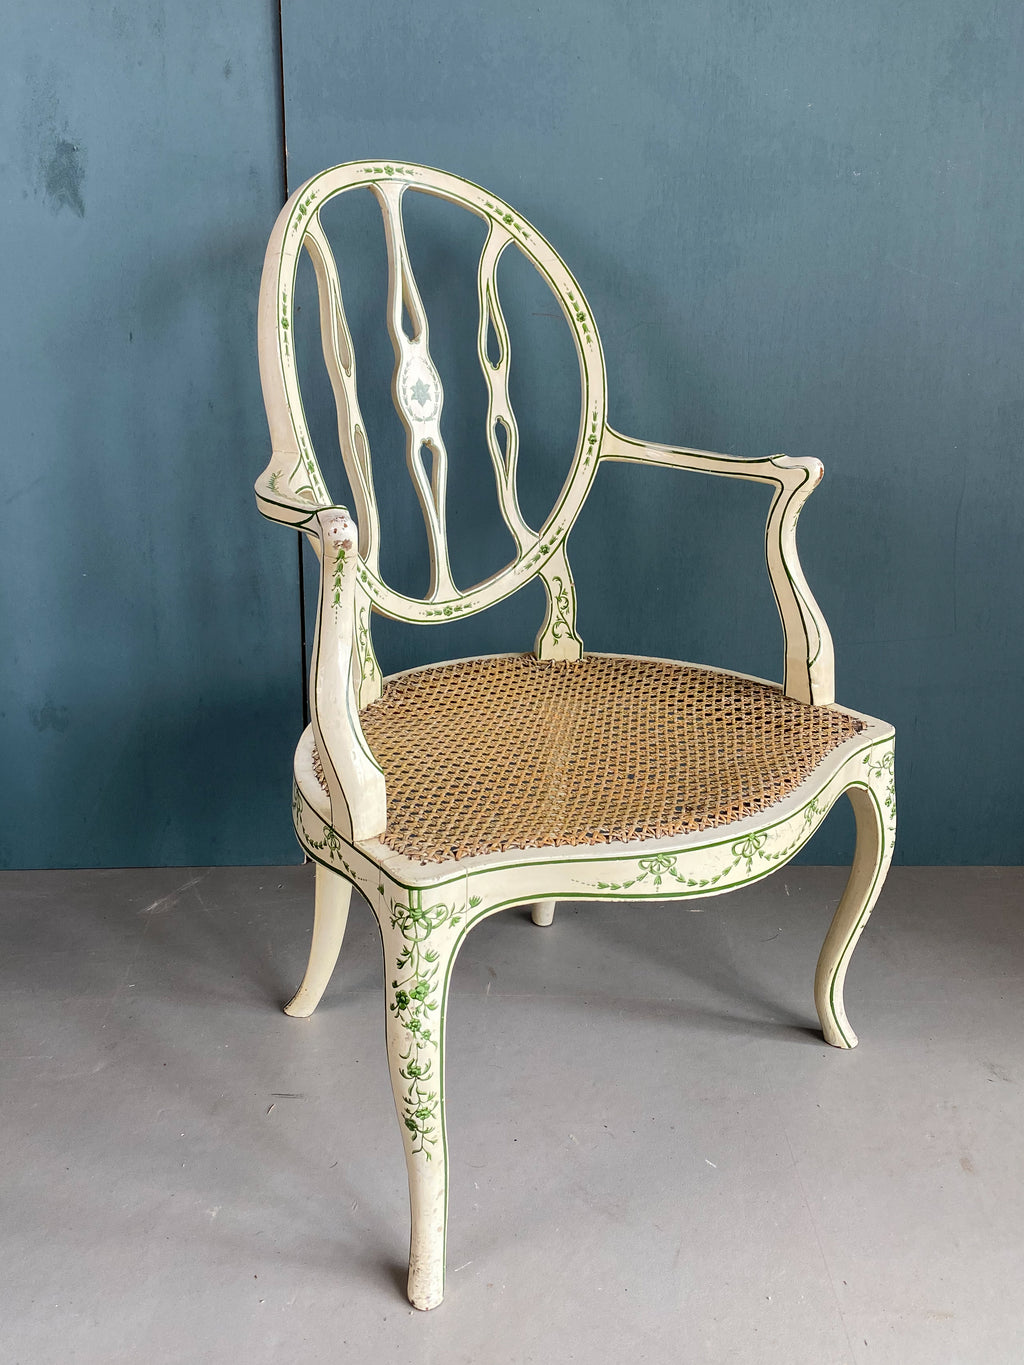 A George III Style Painted Chair